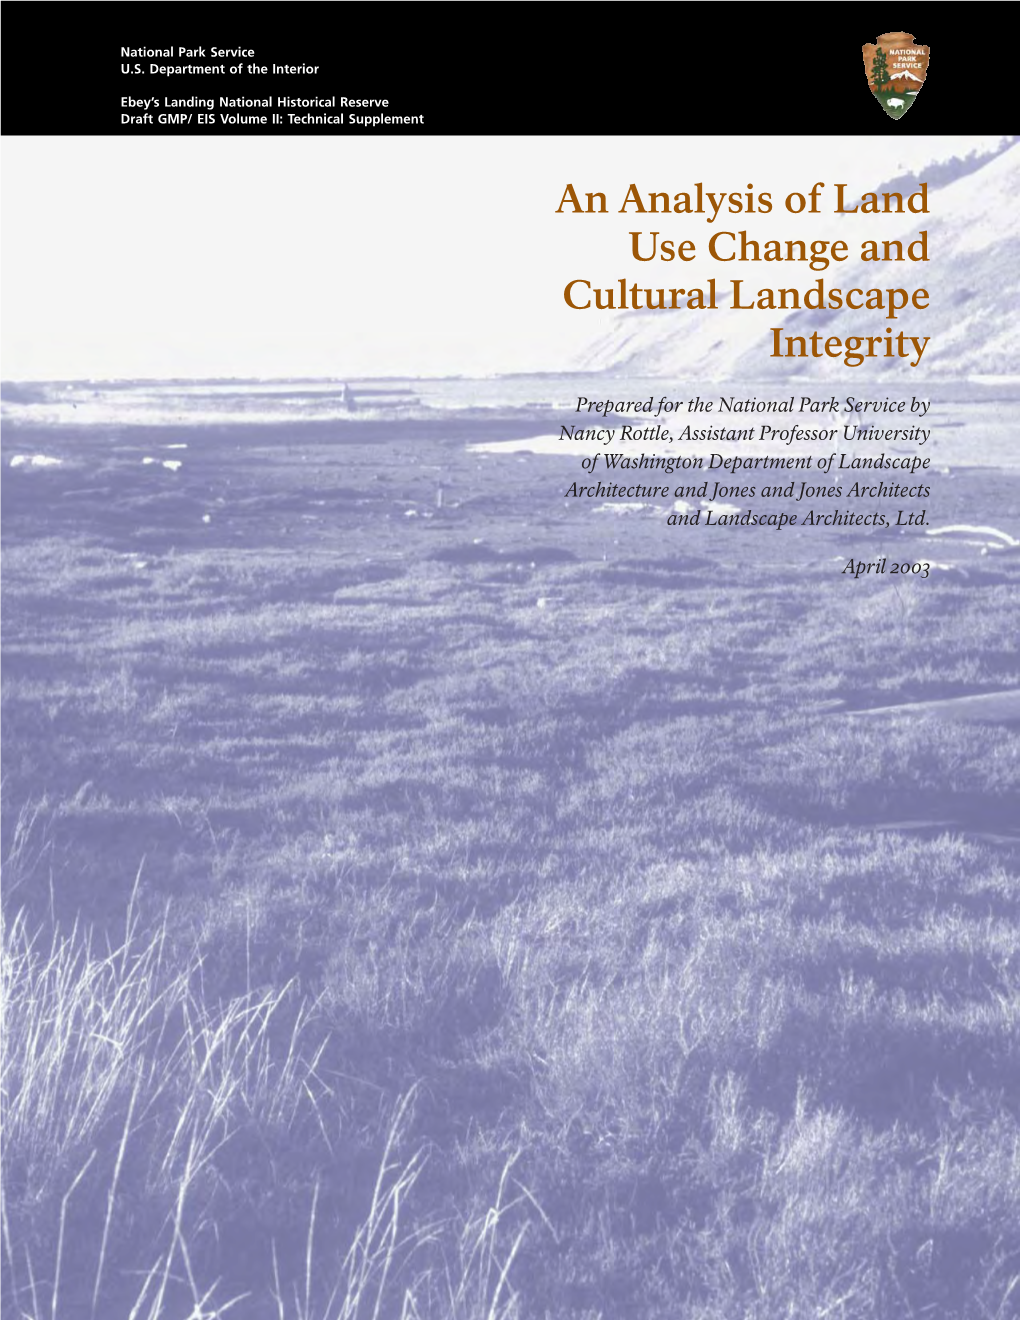 An Analysis of Land Use Change and Cultural Landscape Integrity